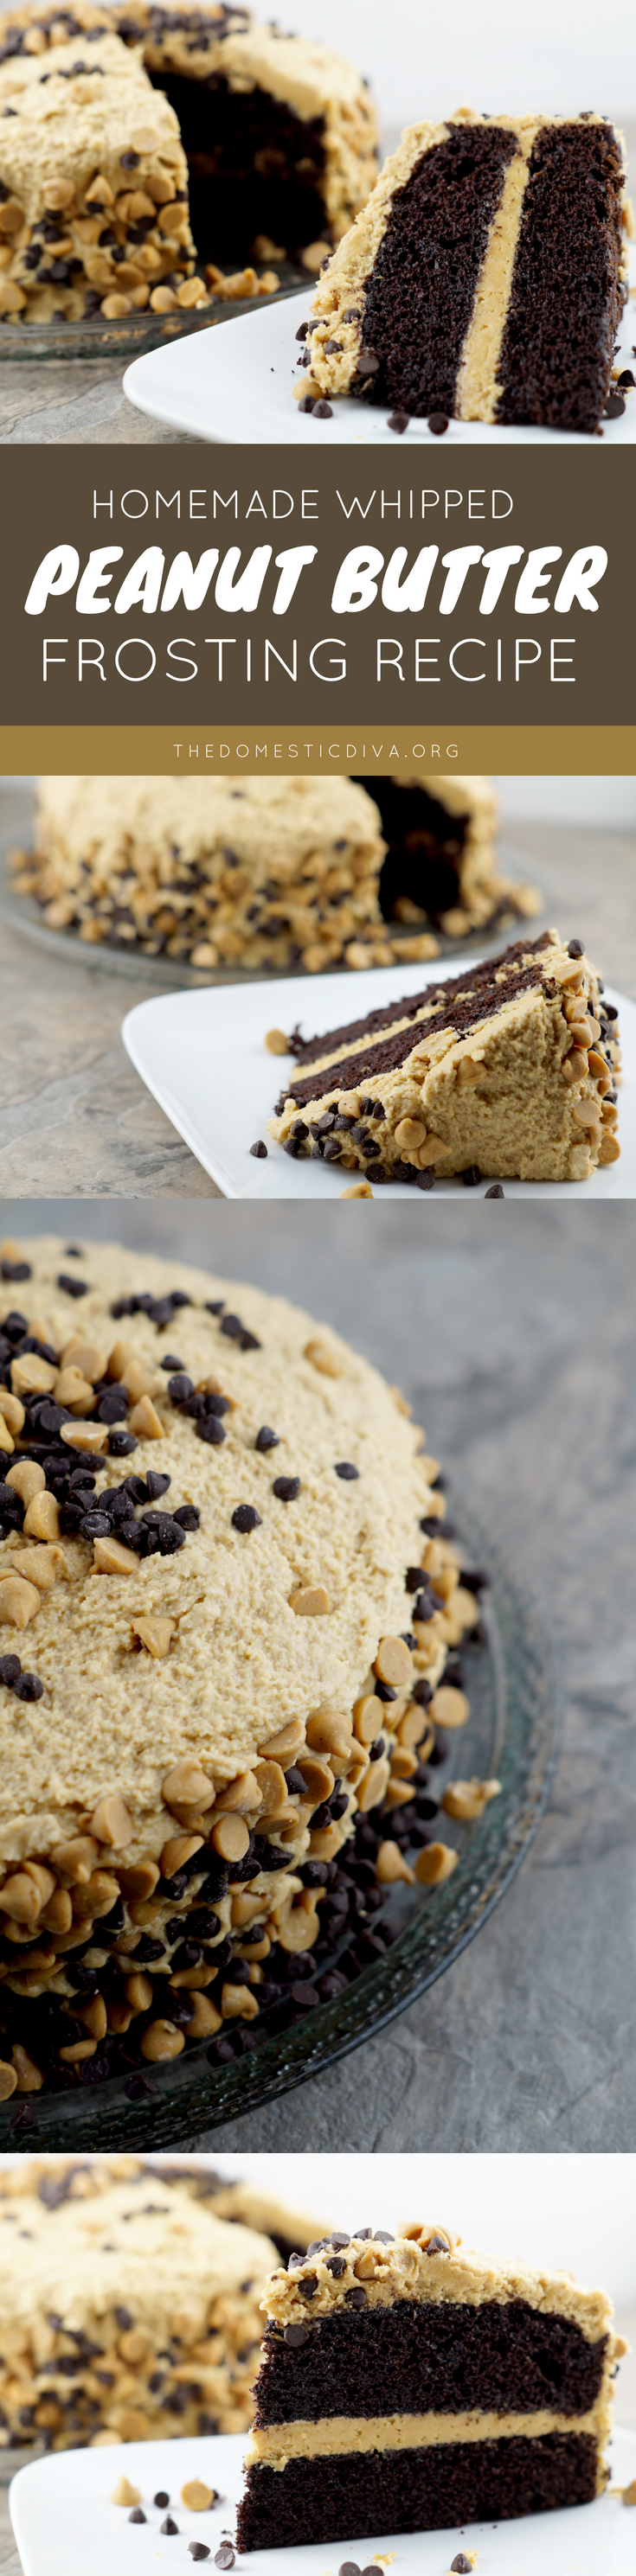 Chocolate Layered Cake with Homemade Whipped Peanut Butter Frosting Recipe: Dark Chocolate layered cake with creamy peanut butter frosting topped with morsels of peanut butter and chocolate chips. #recipe #homemade #frosting #peanutbutter